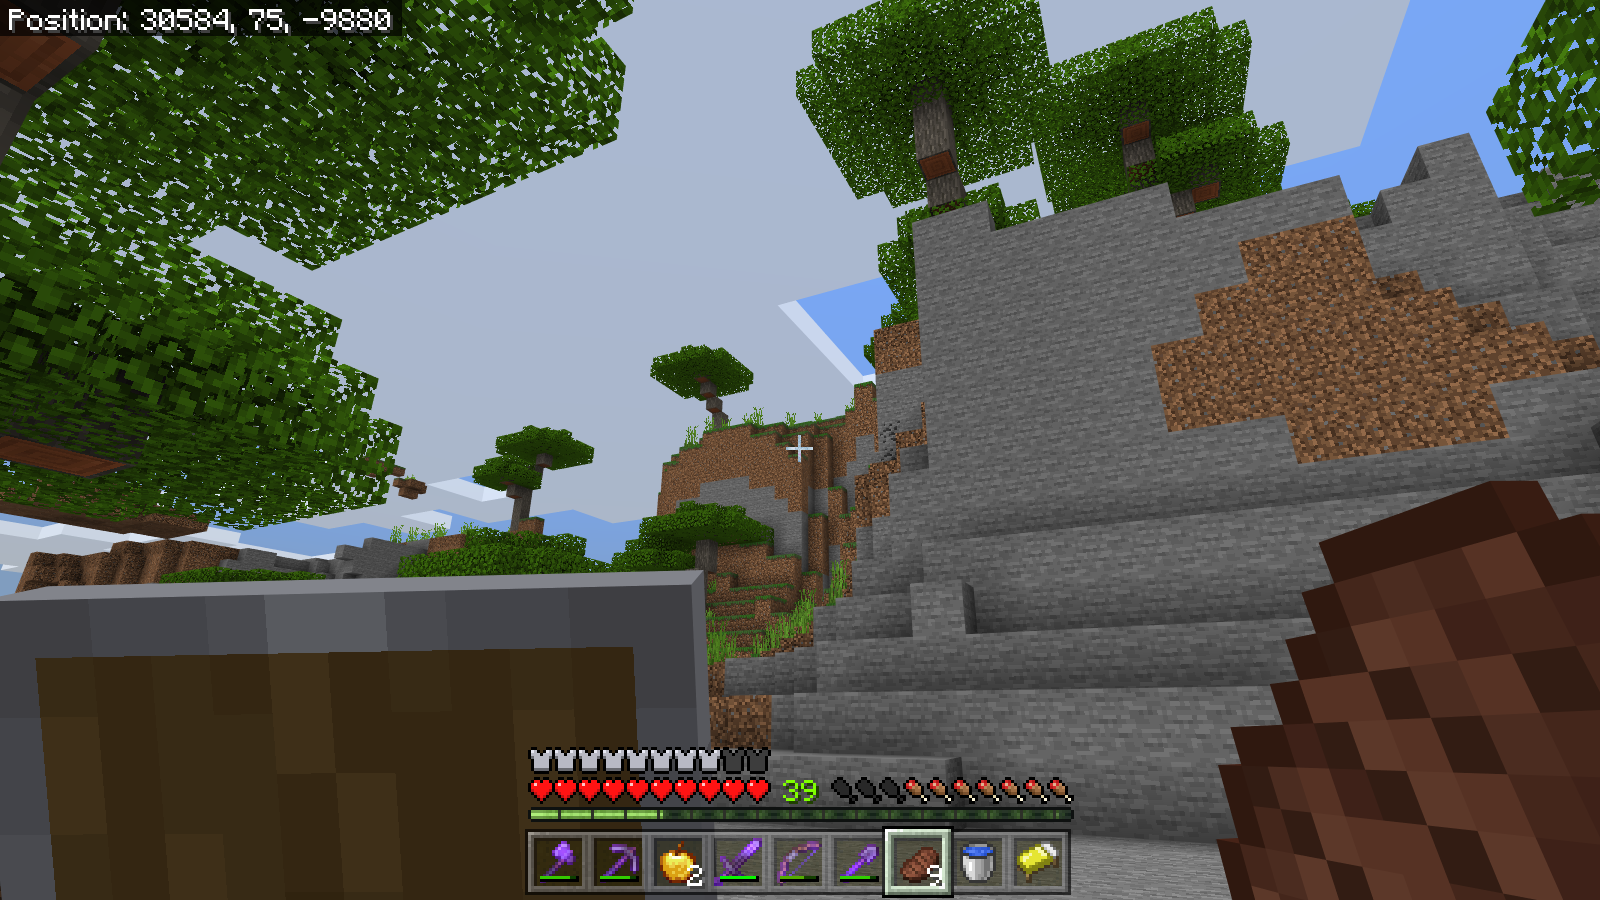 What is this biome? The leaves are green but with acacia ...